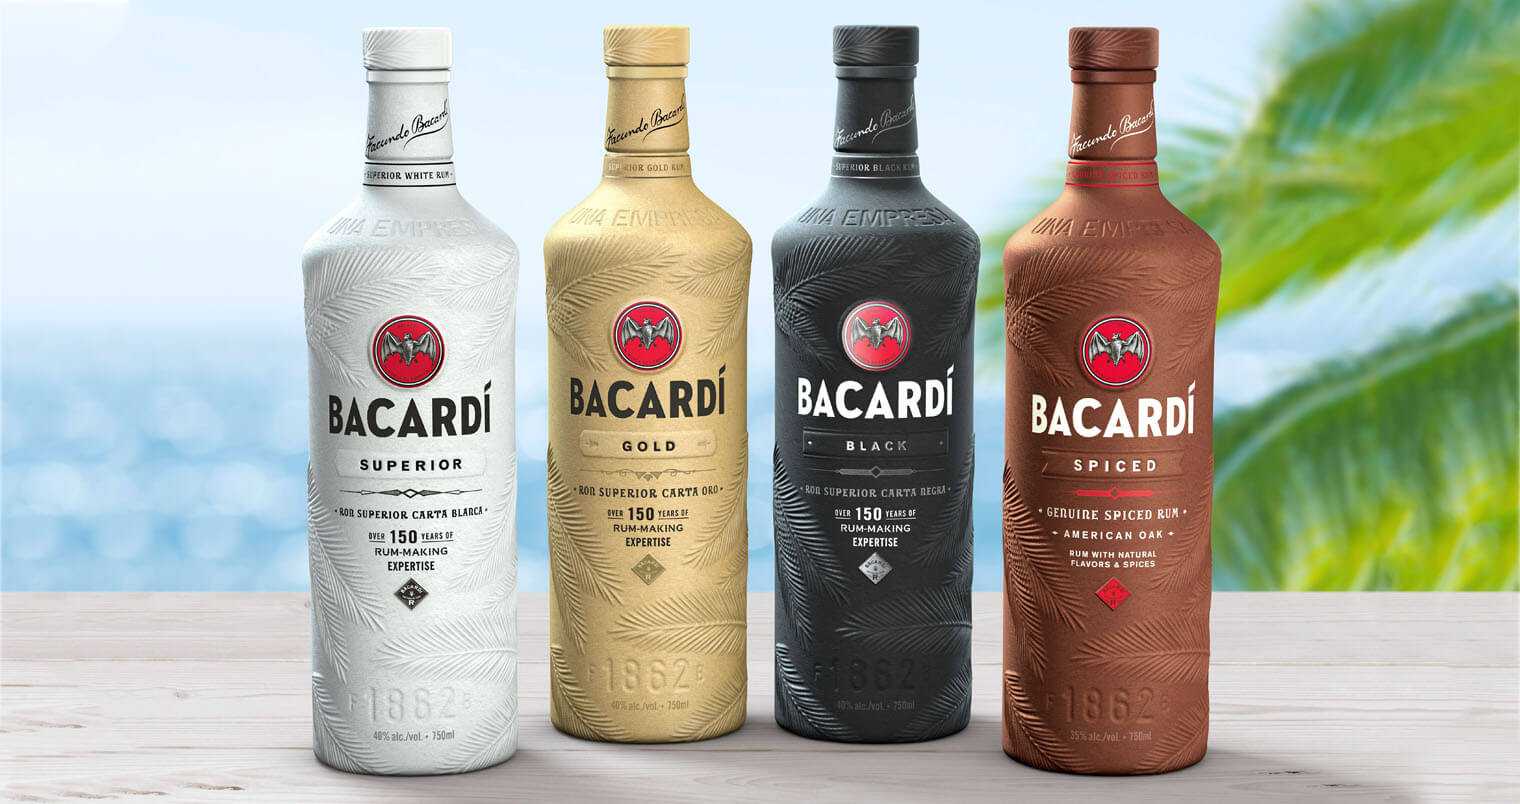 Bacardi Innovative Paper Bottles Lineup, bottles on bar, tropical beach, featured image